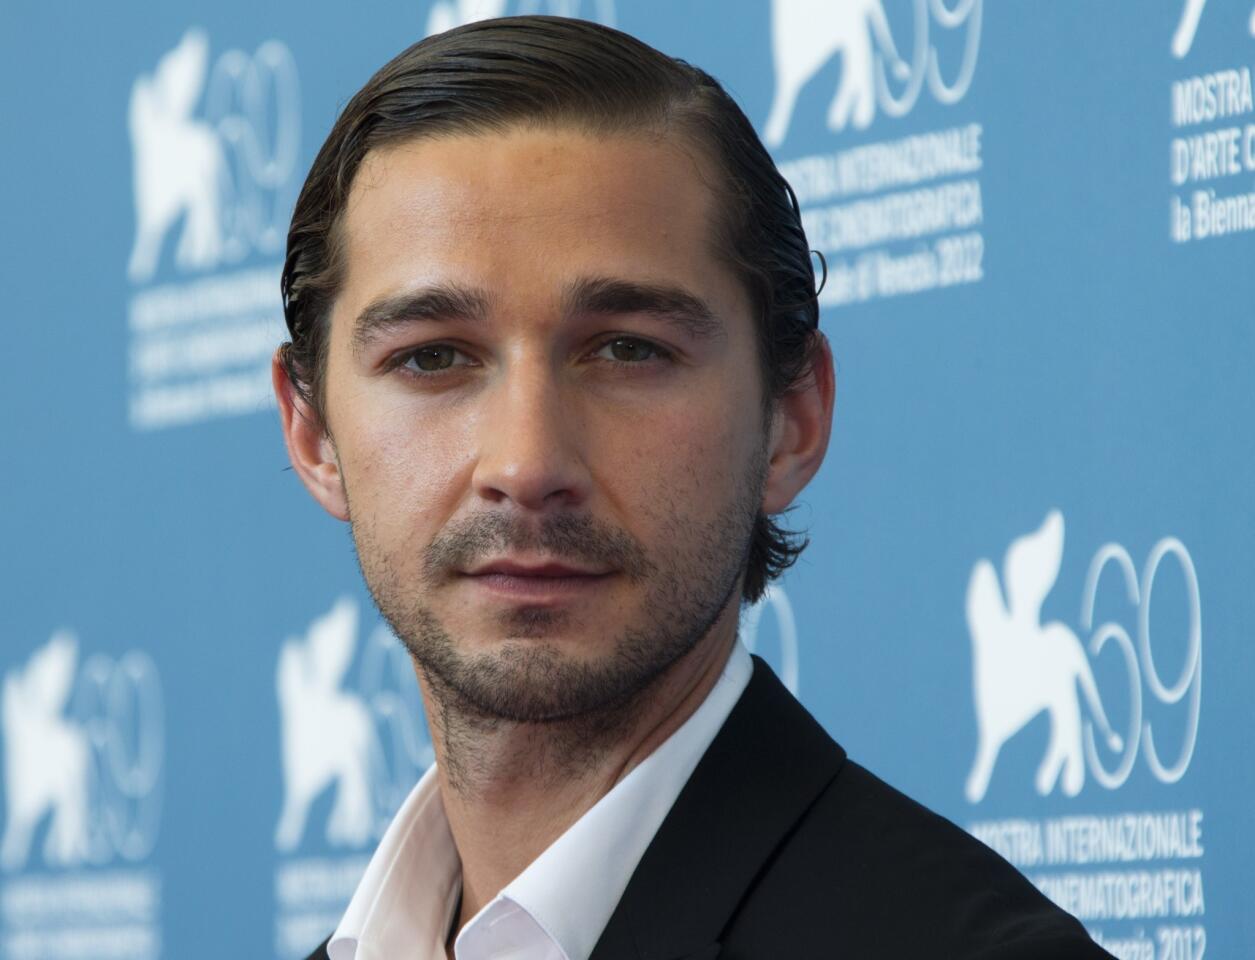 Shia LaBeouf says he's retiring from the public eye